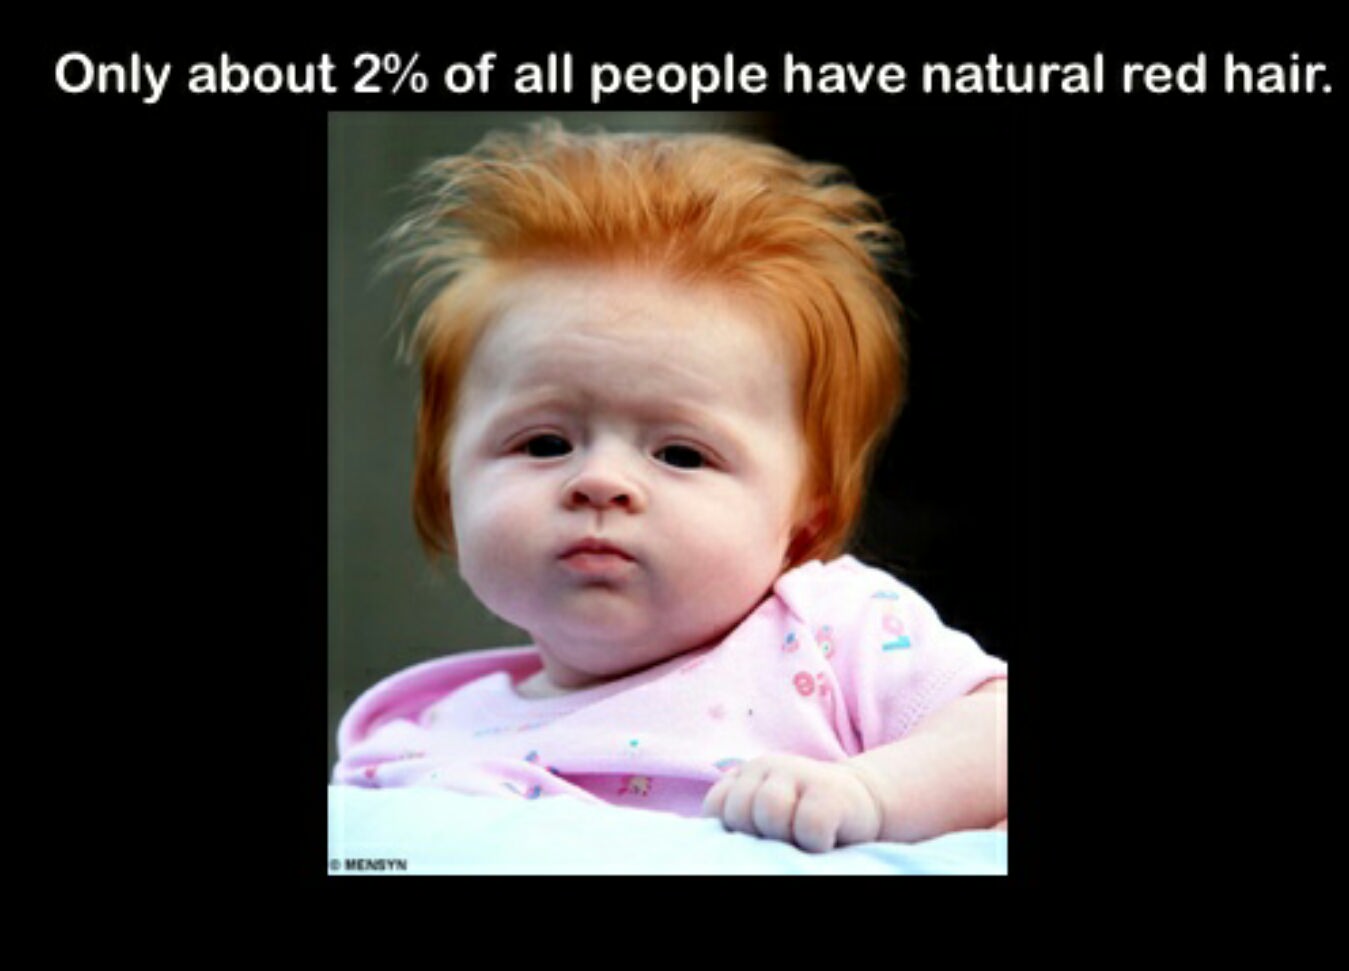 cute ginger kid - Only about 2% of all people have natural red hair. Mensyn